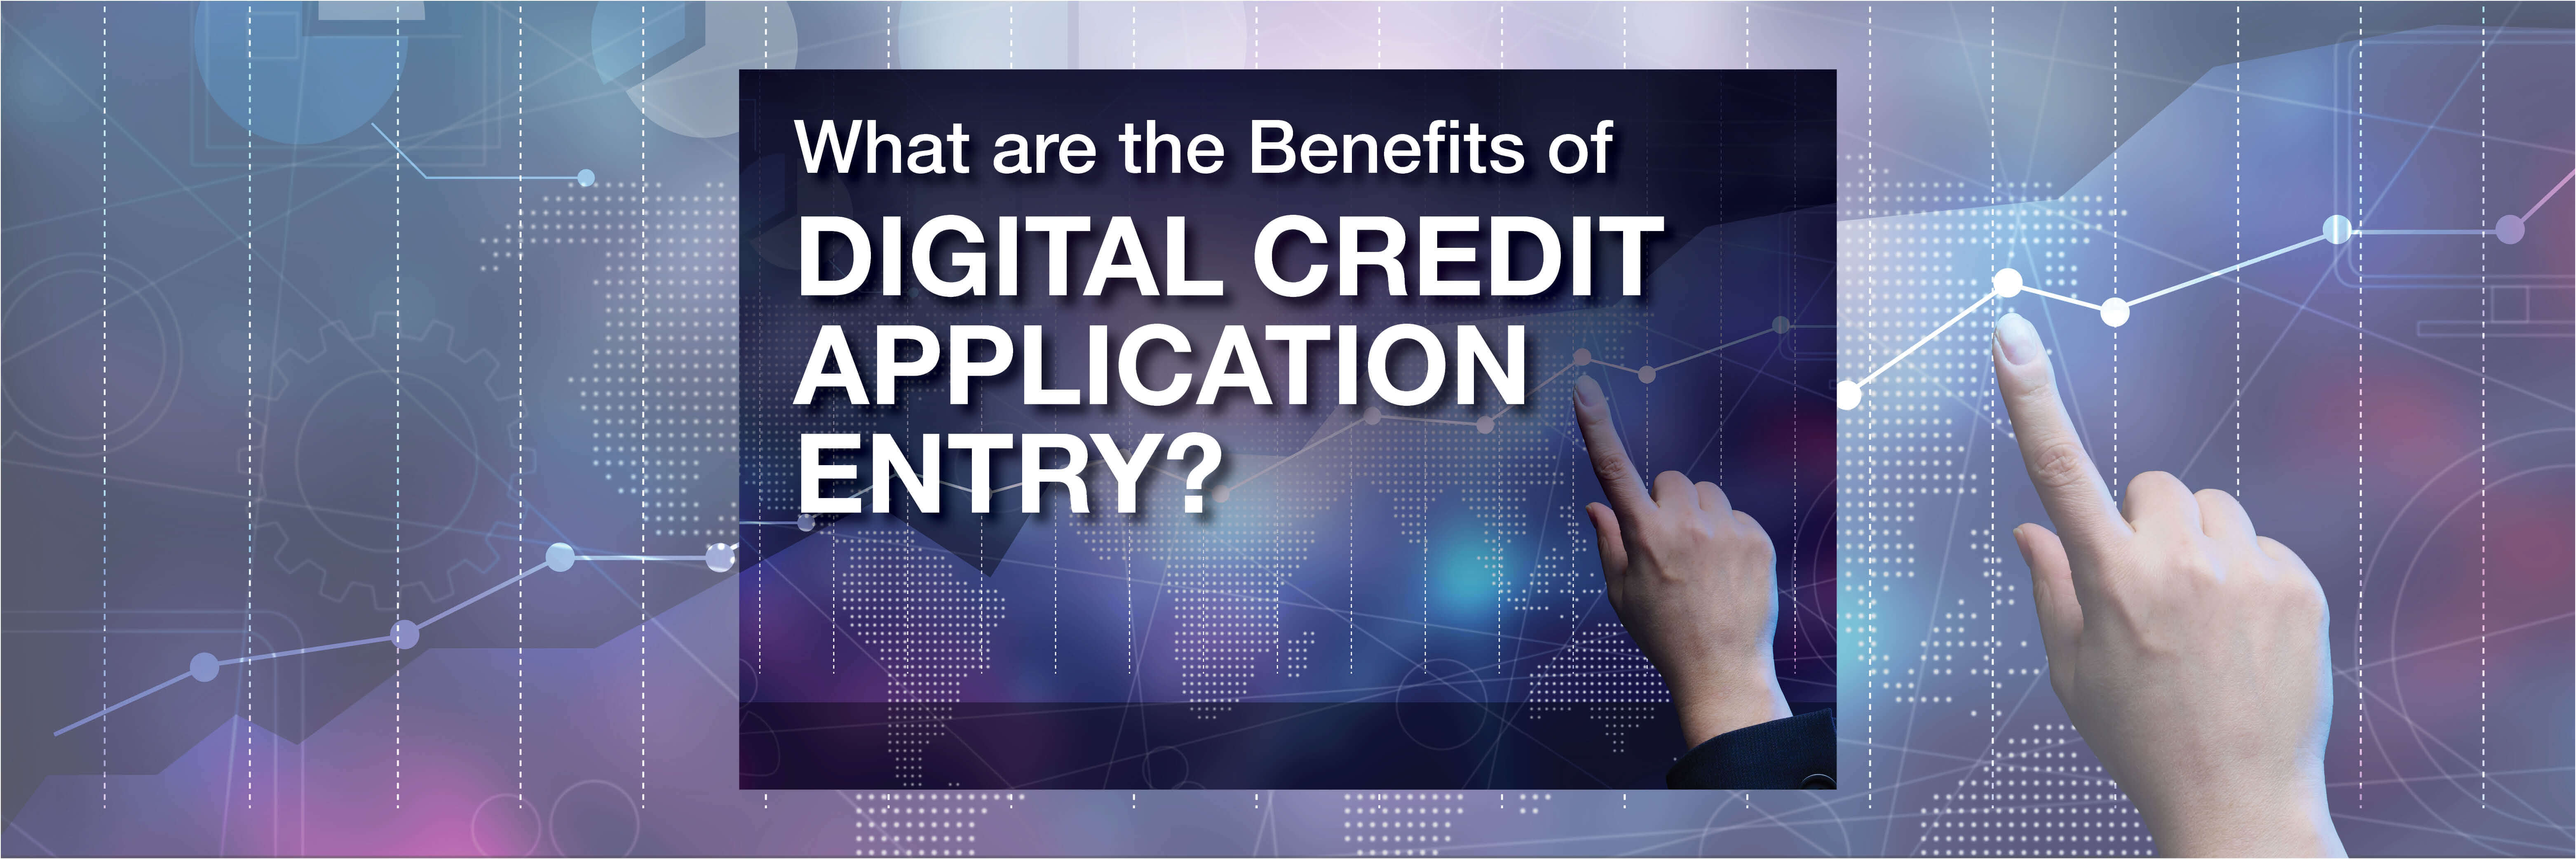 What are the Benefits of Digital Credit Application Entry?